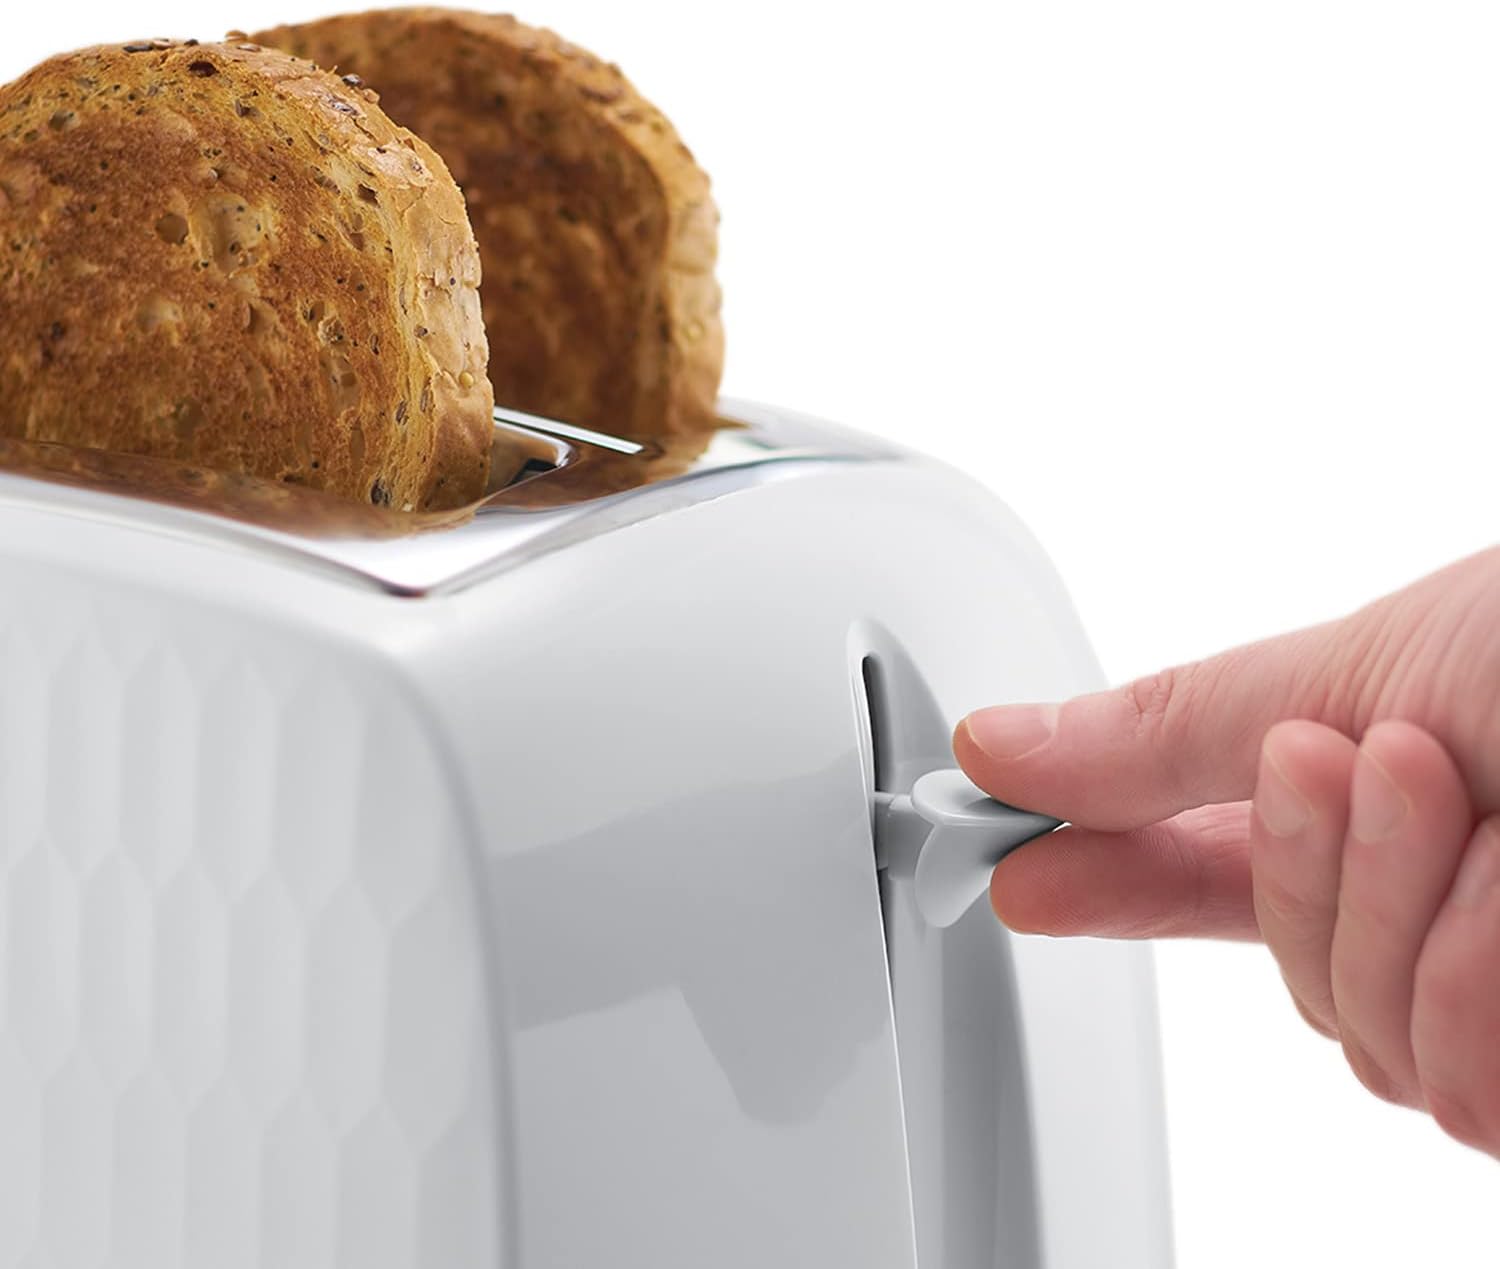 Russell Hobbs Honeycomb 2 Slice Toaster - with Extra Wide Slots and High Lift Feature, White